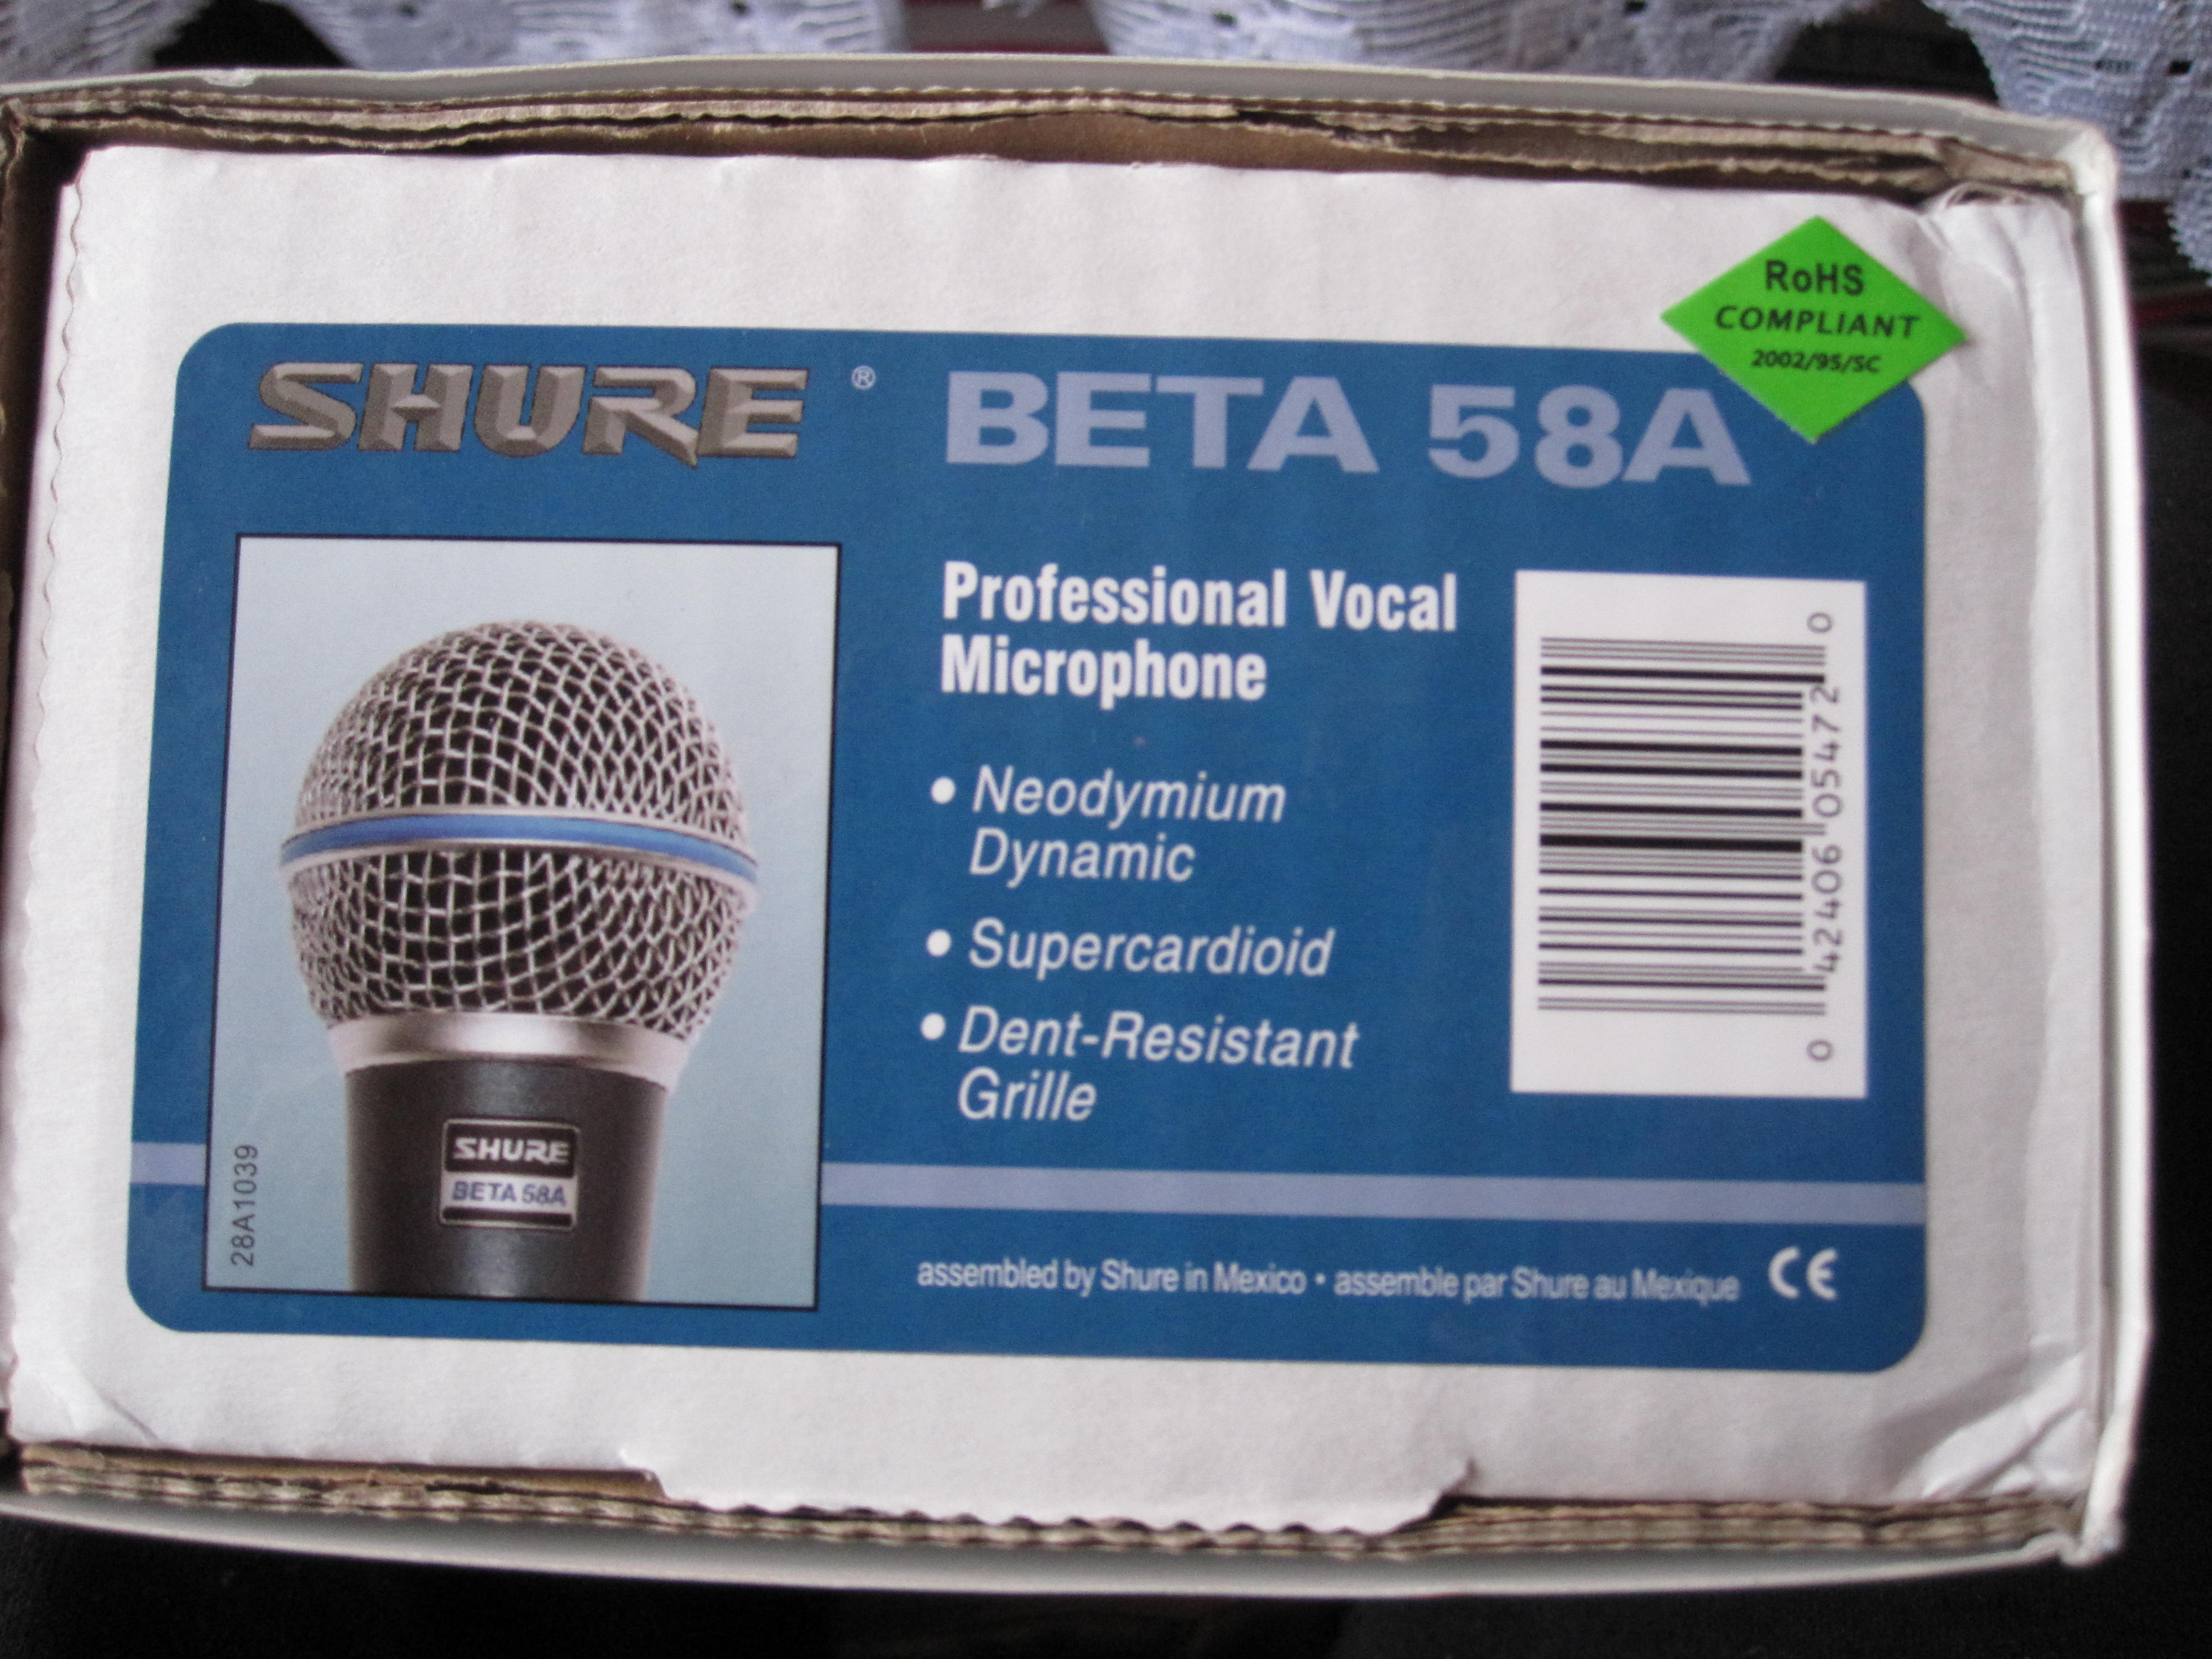 Shure Beta 58A Original: Detailed Photos for Comparison, Features and ...